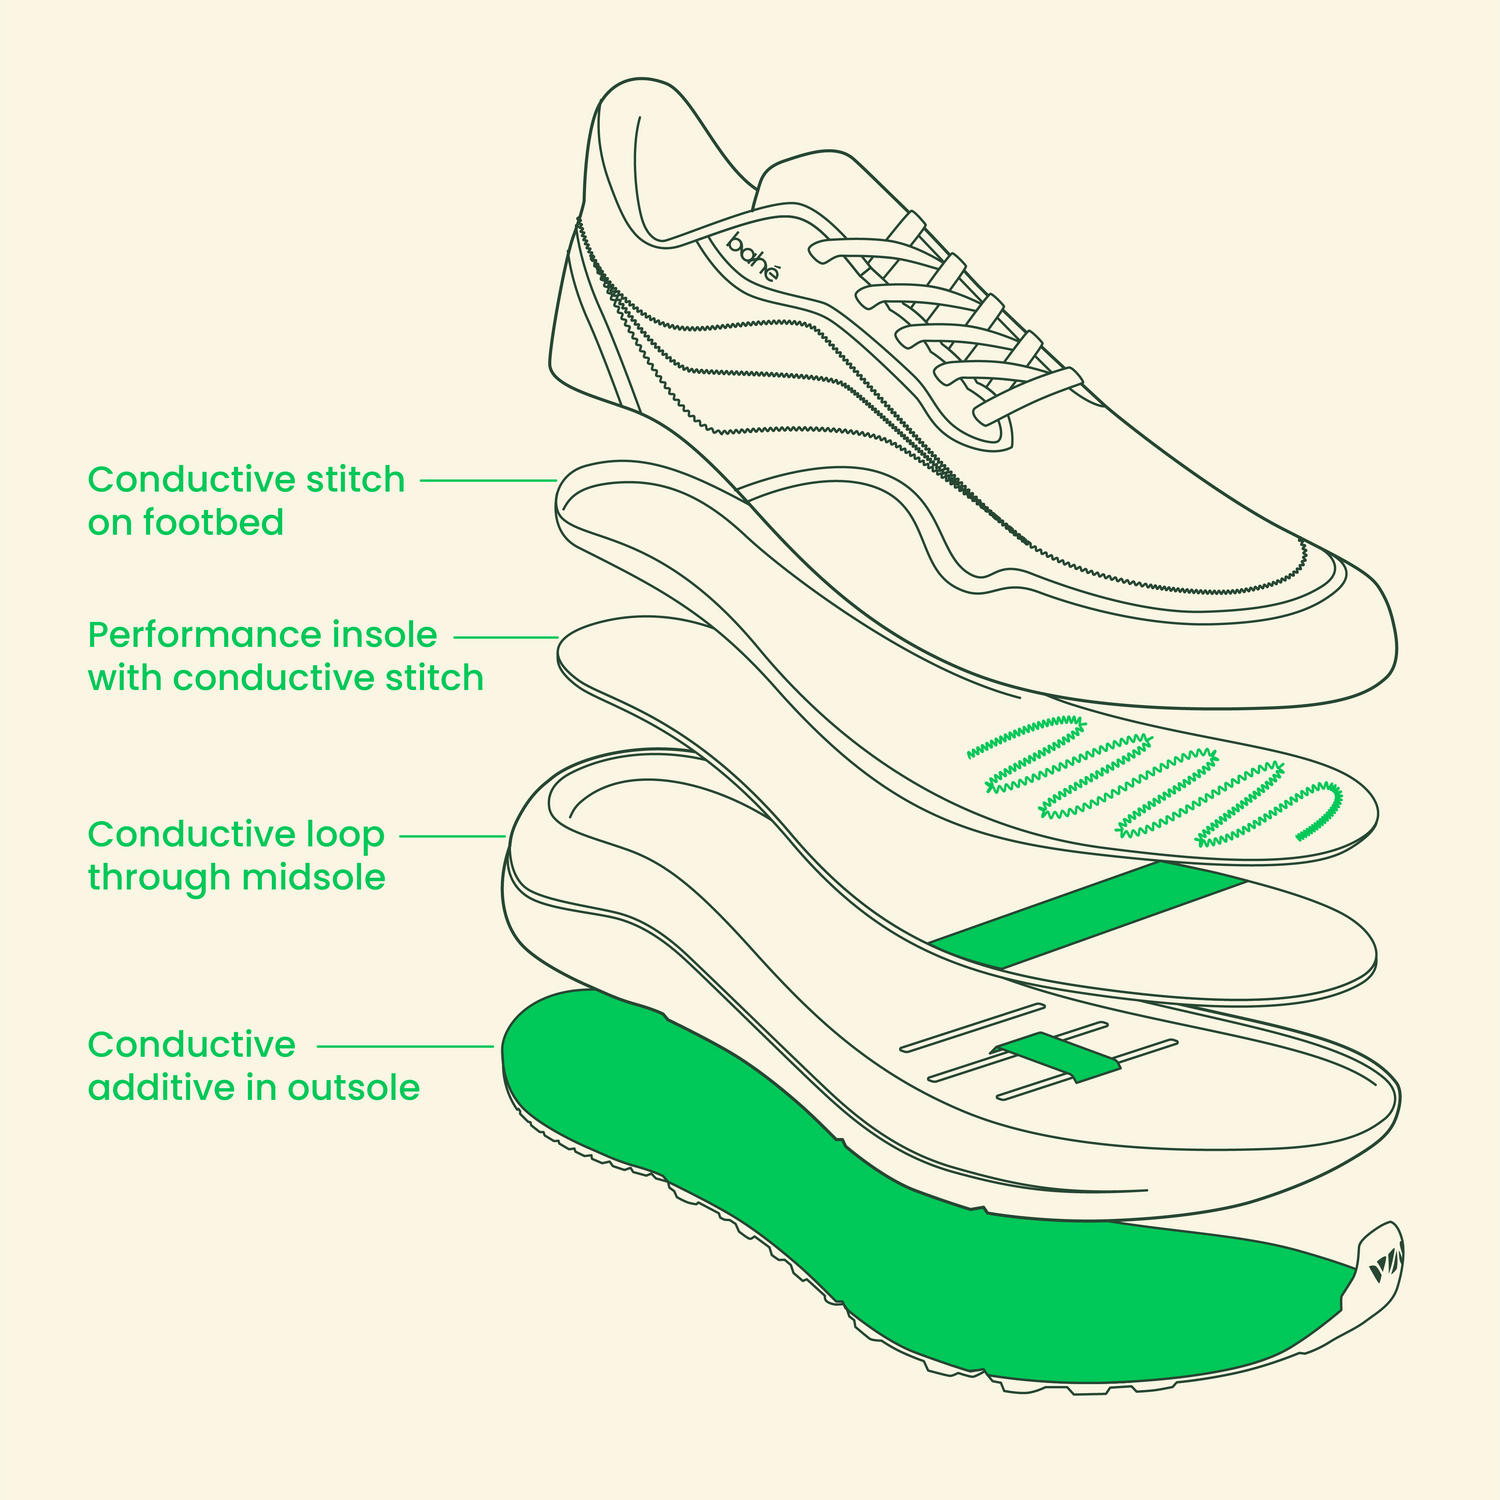 Exploded graphic showing the conductive components of Bahé grounding shoes